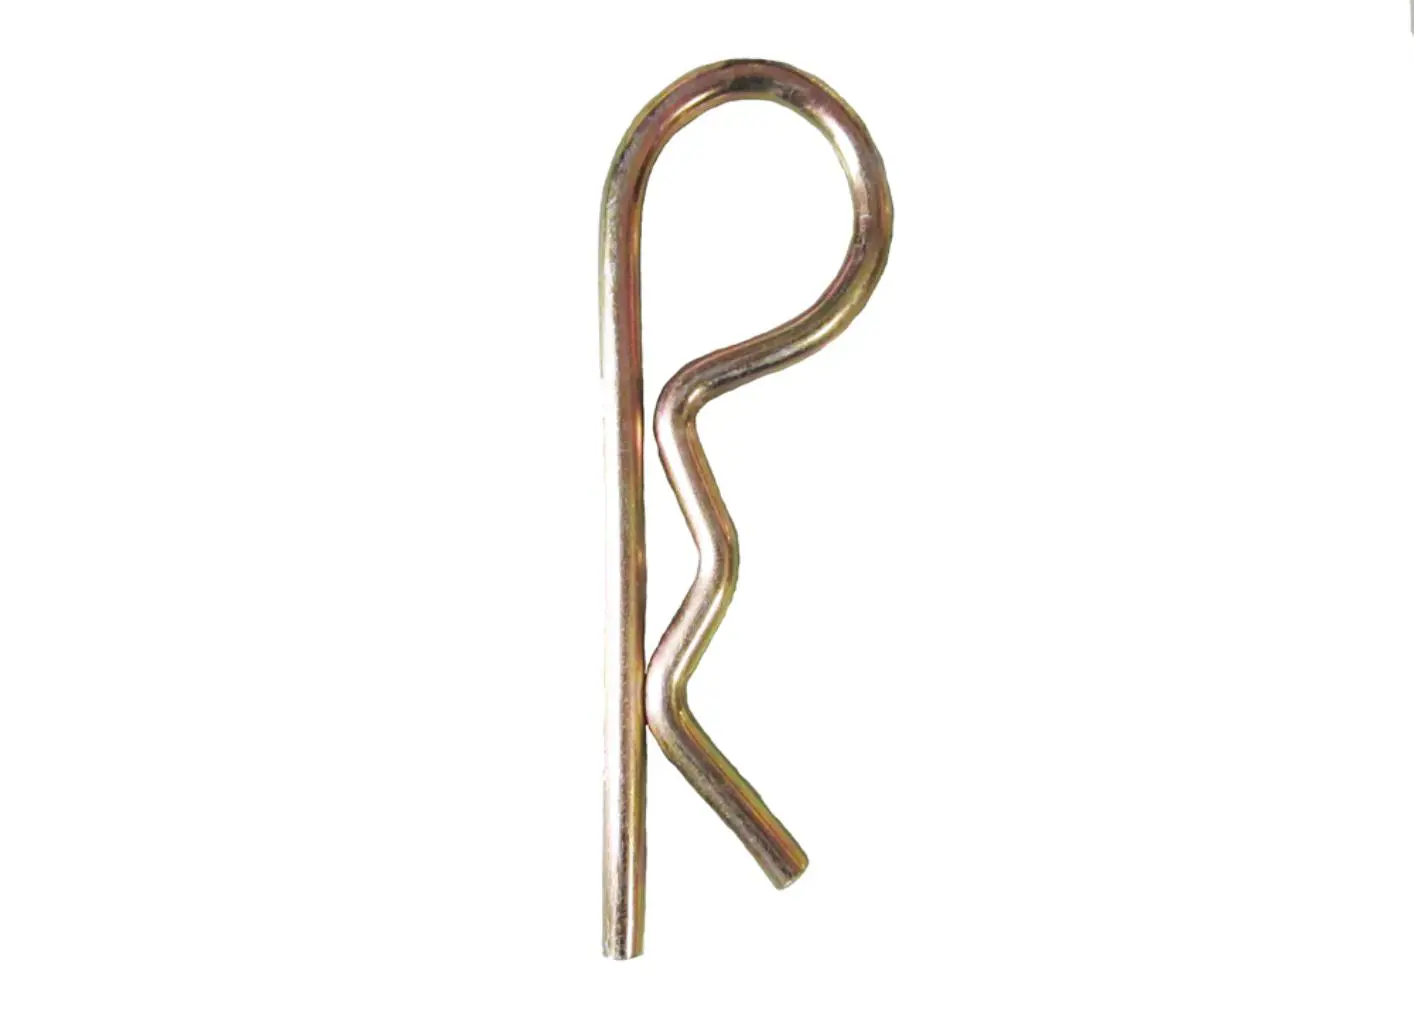 Image 1 for #87299391 "R" Clip Pins 1/16" x 1-9/16"